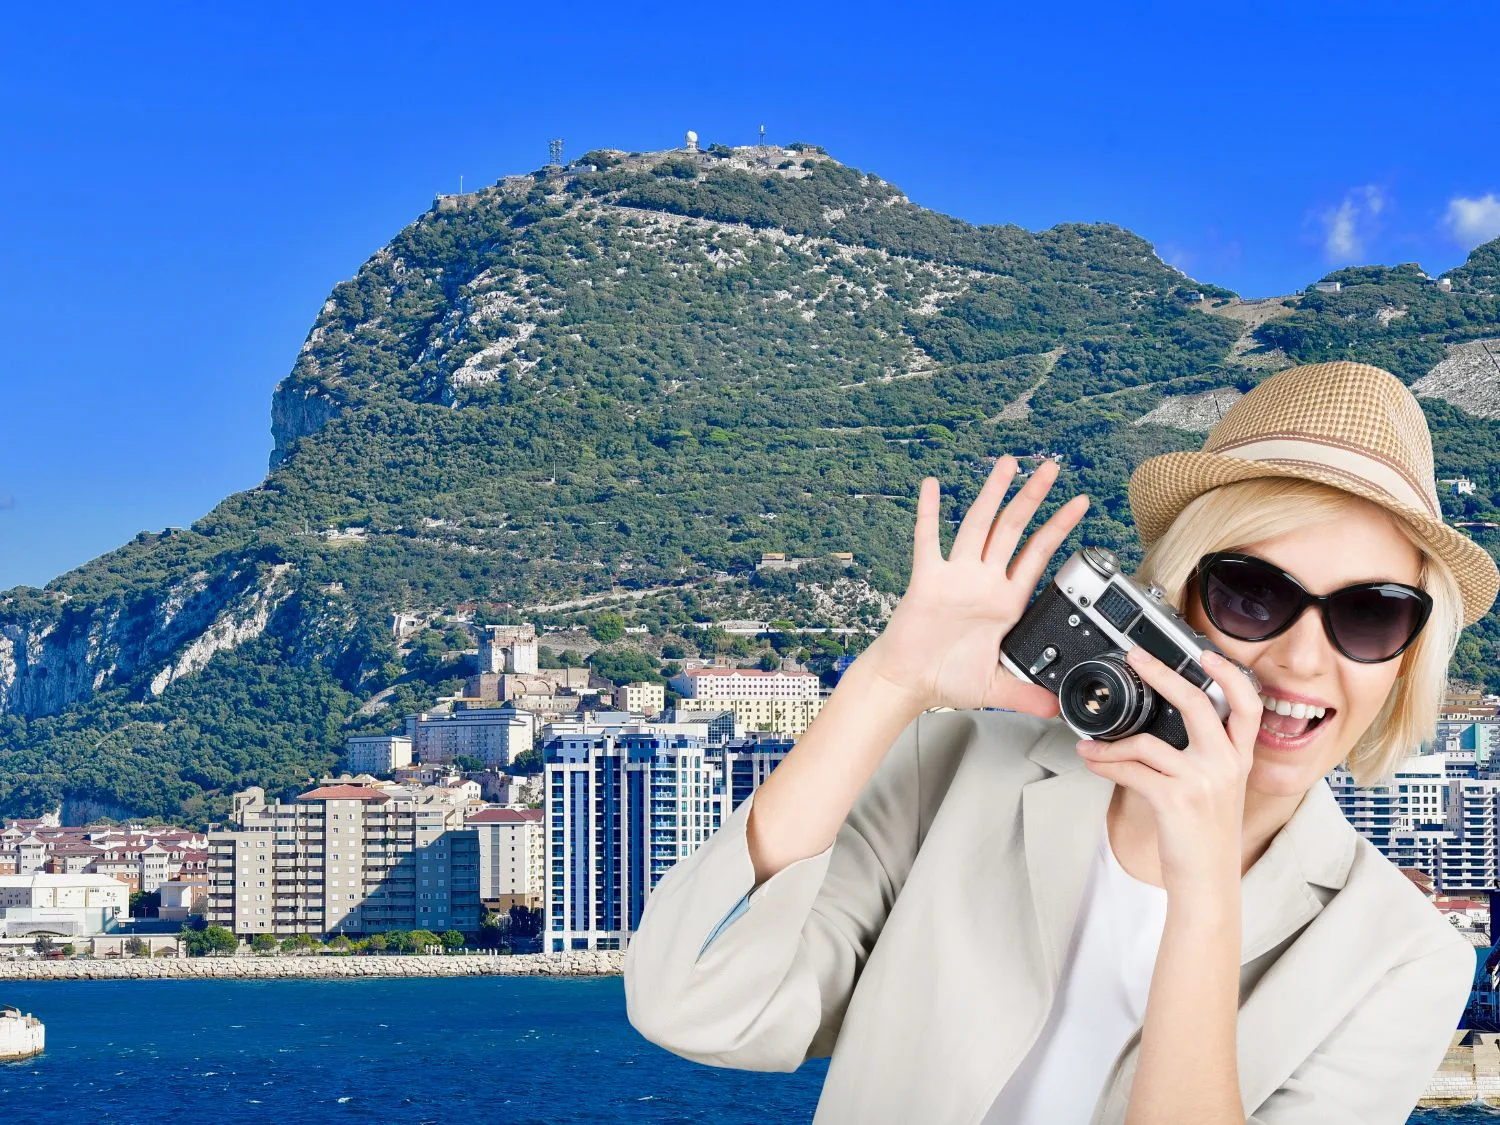 The 6 Best Gibraltar Tours For Unforgettable Adventures That Are Achievable & Affordable